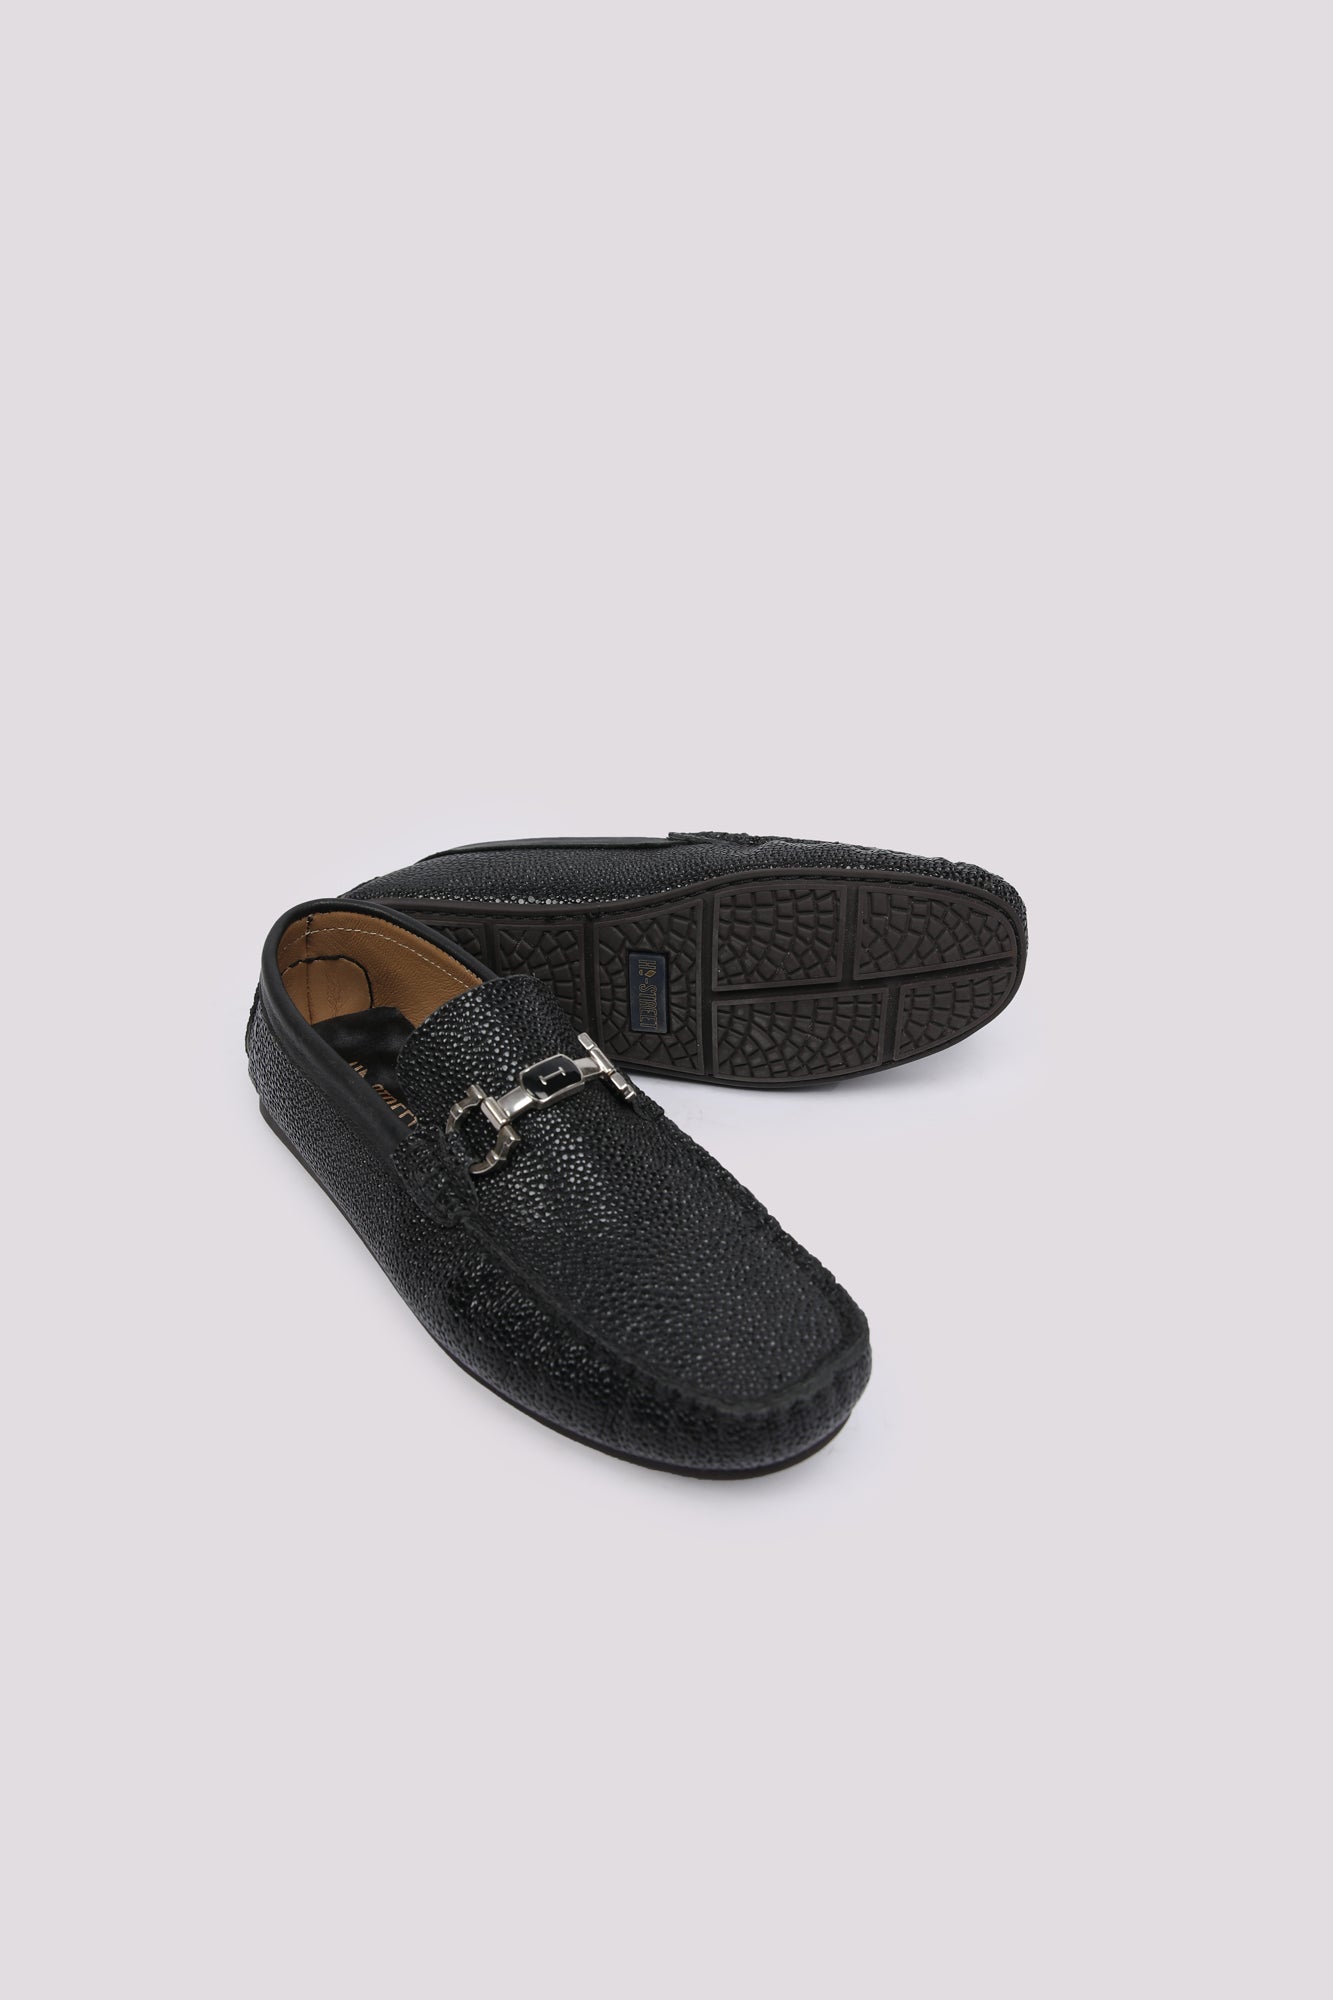 Black Textured Patent Moccasin